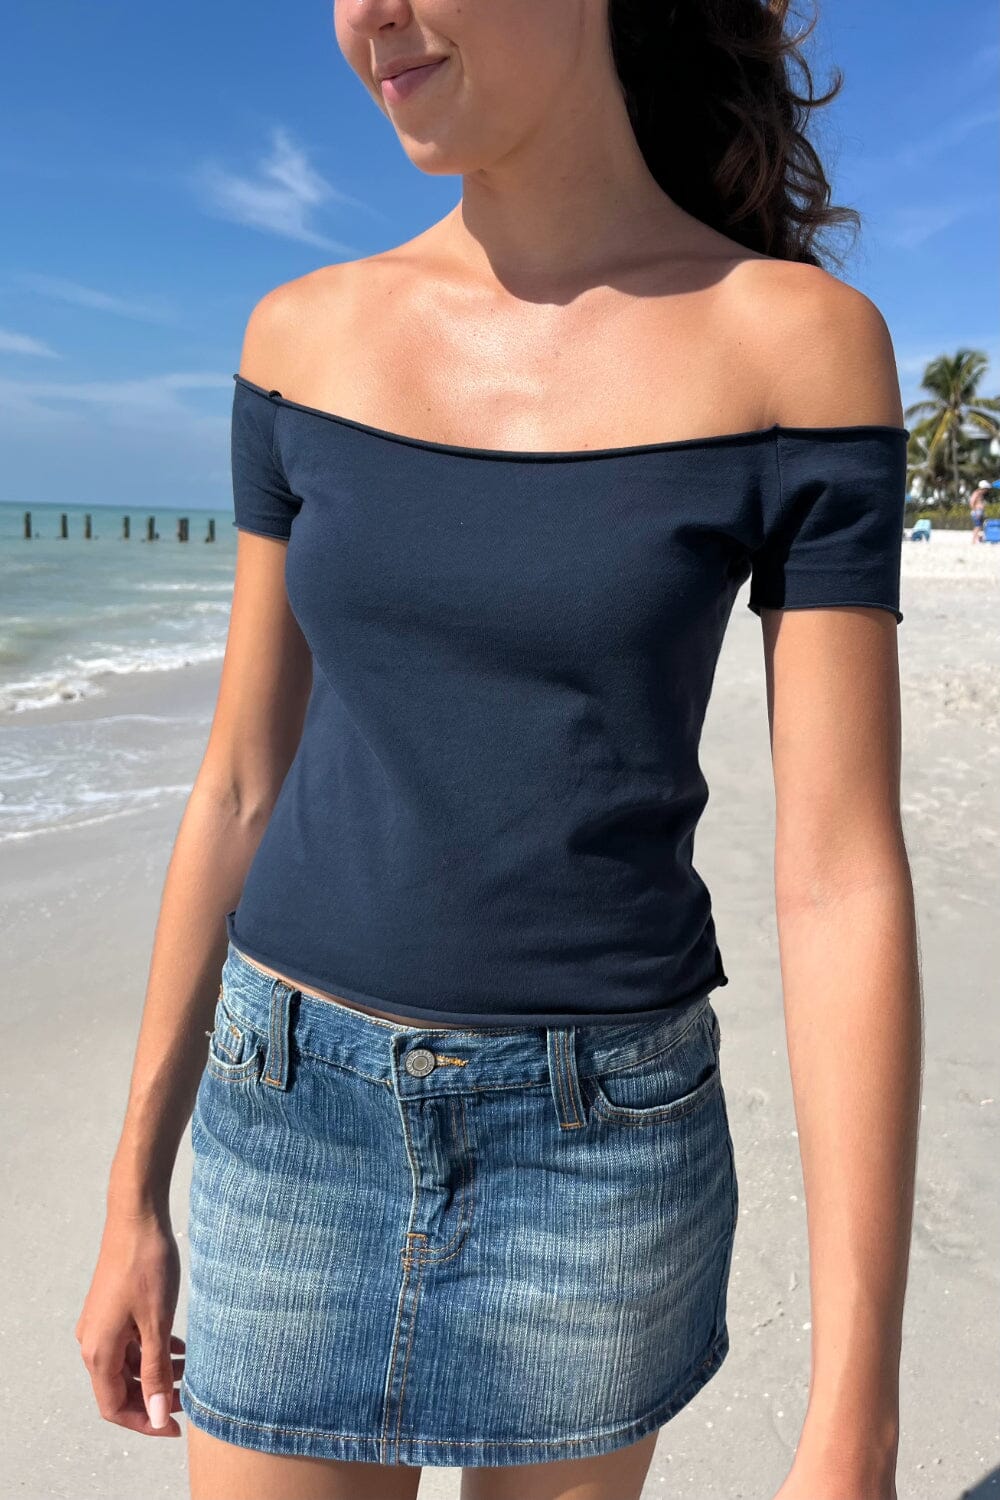 Brandy Melville Bonnie Top Gray - $8 (55% Off Retail) - From Gab